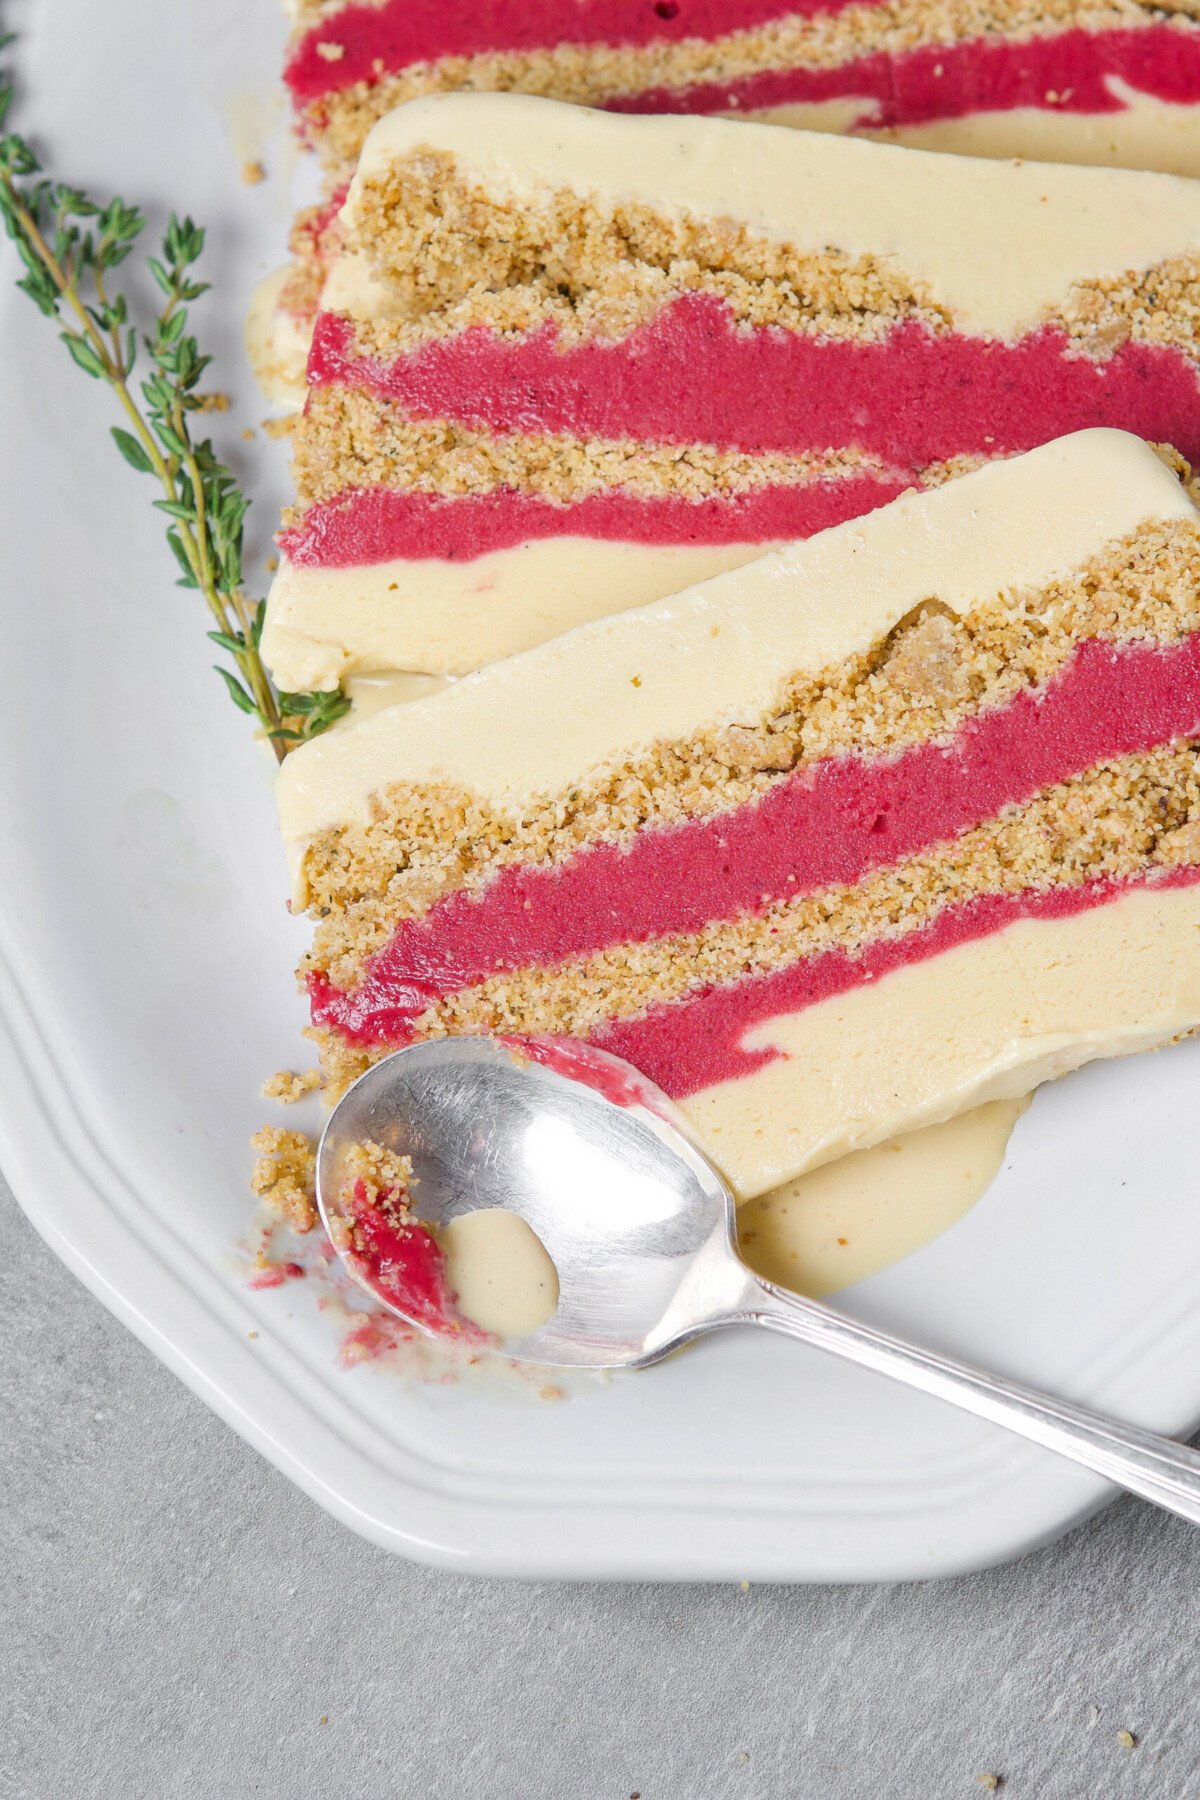 A wonderfully festive, and easy-to-make dessert, this layered ice cream cake featuring creamy goat milk ice cream, naturally sweetened cranberry curd, and a nutty biscotti layer, is most definitely one for the books. | from Lauren Grant of Zestful Kitchen